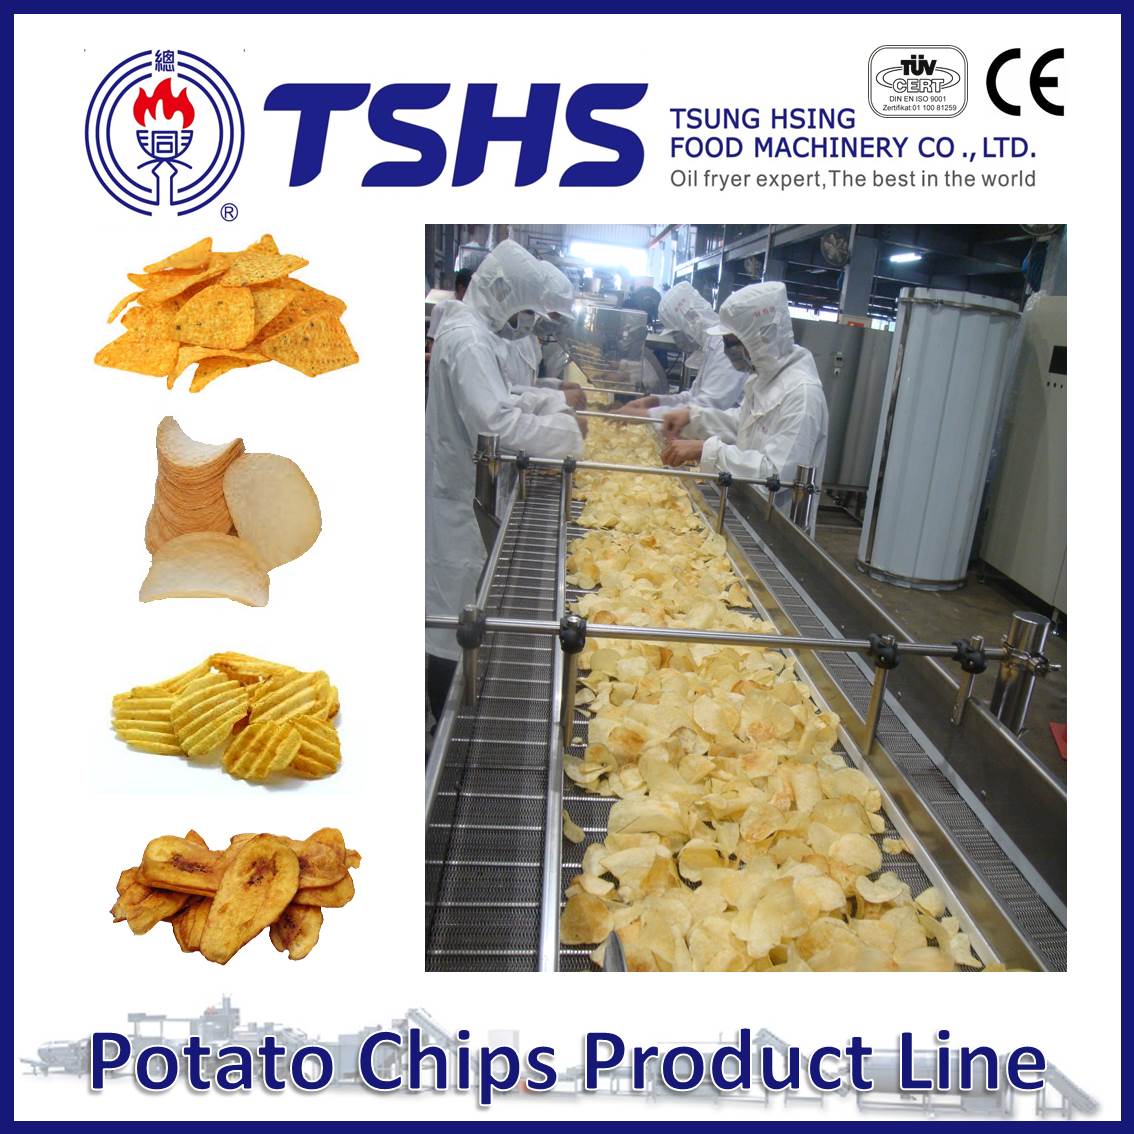 https://im01.itaiwantrade.com/1731d701-703e-41bb-ad03-aa4ff6381679/Made_in_Taiwan_High_Quality_Pringles_Potato_Chips_Factory_Machines_5-11.jpg